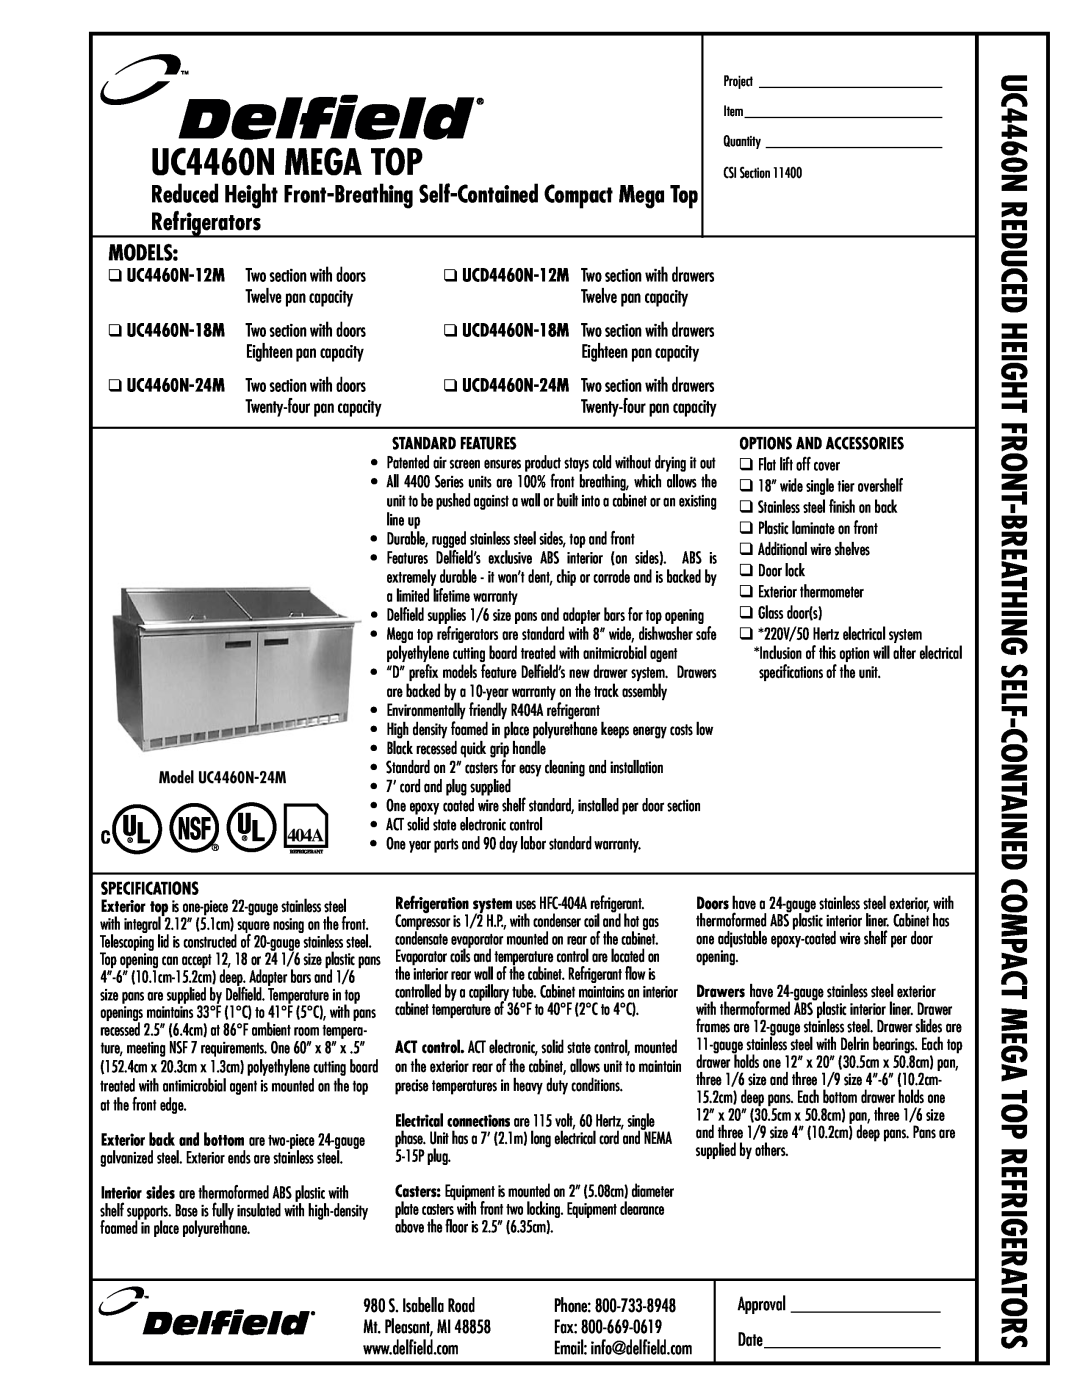 Delfield UC4460N-18M specifications Front-Breathing Self-Contained, Models, Compact Mega Top Refrigerators, Specifications 